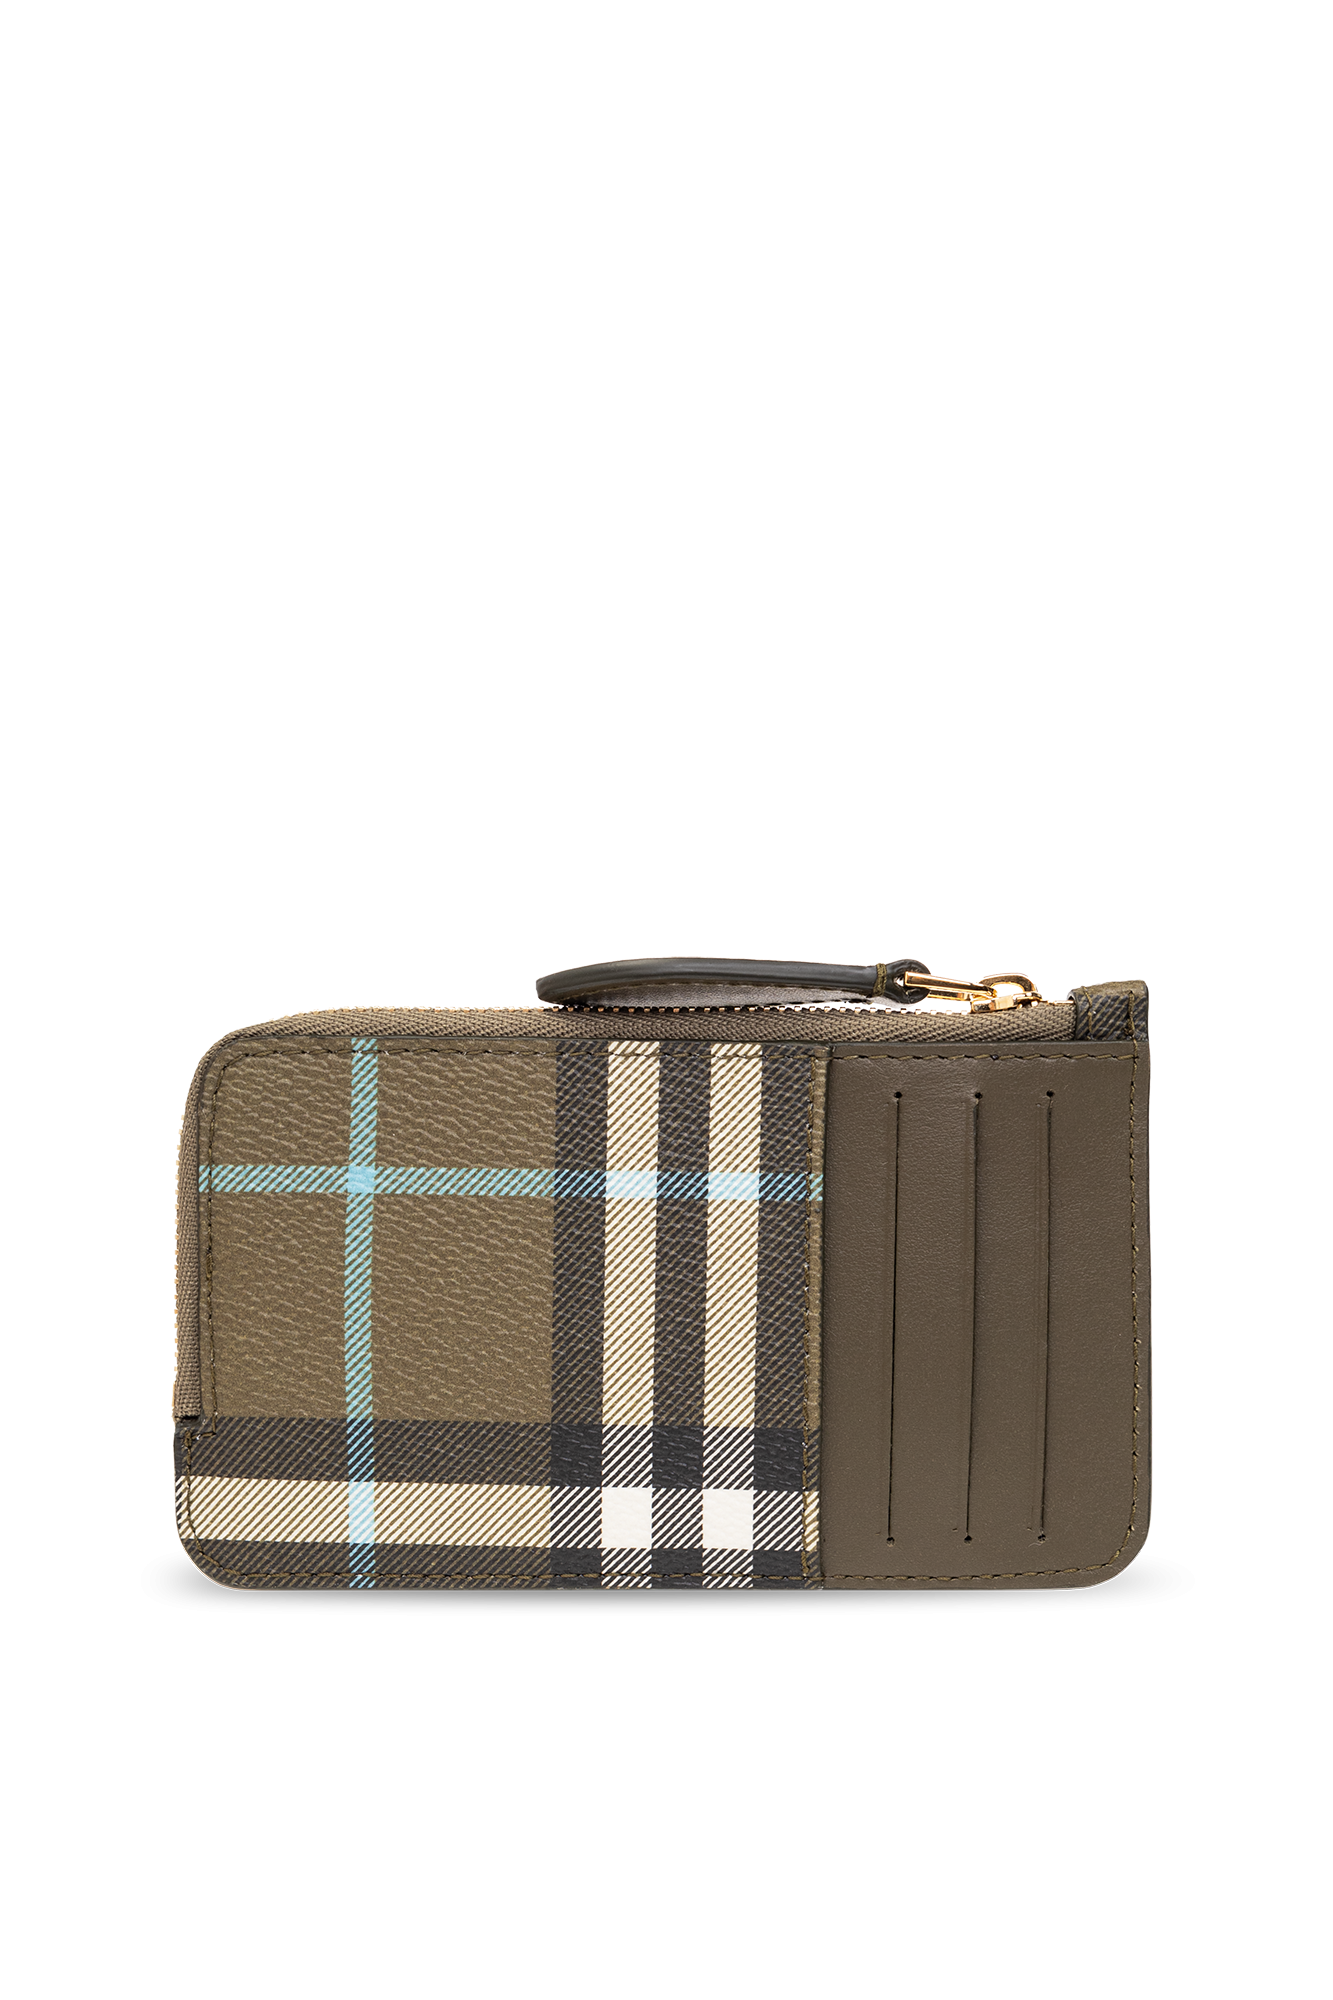 Burberry Women's Checked Card Holder